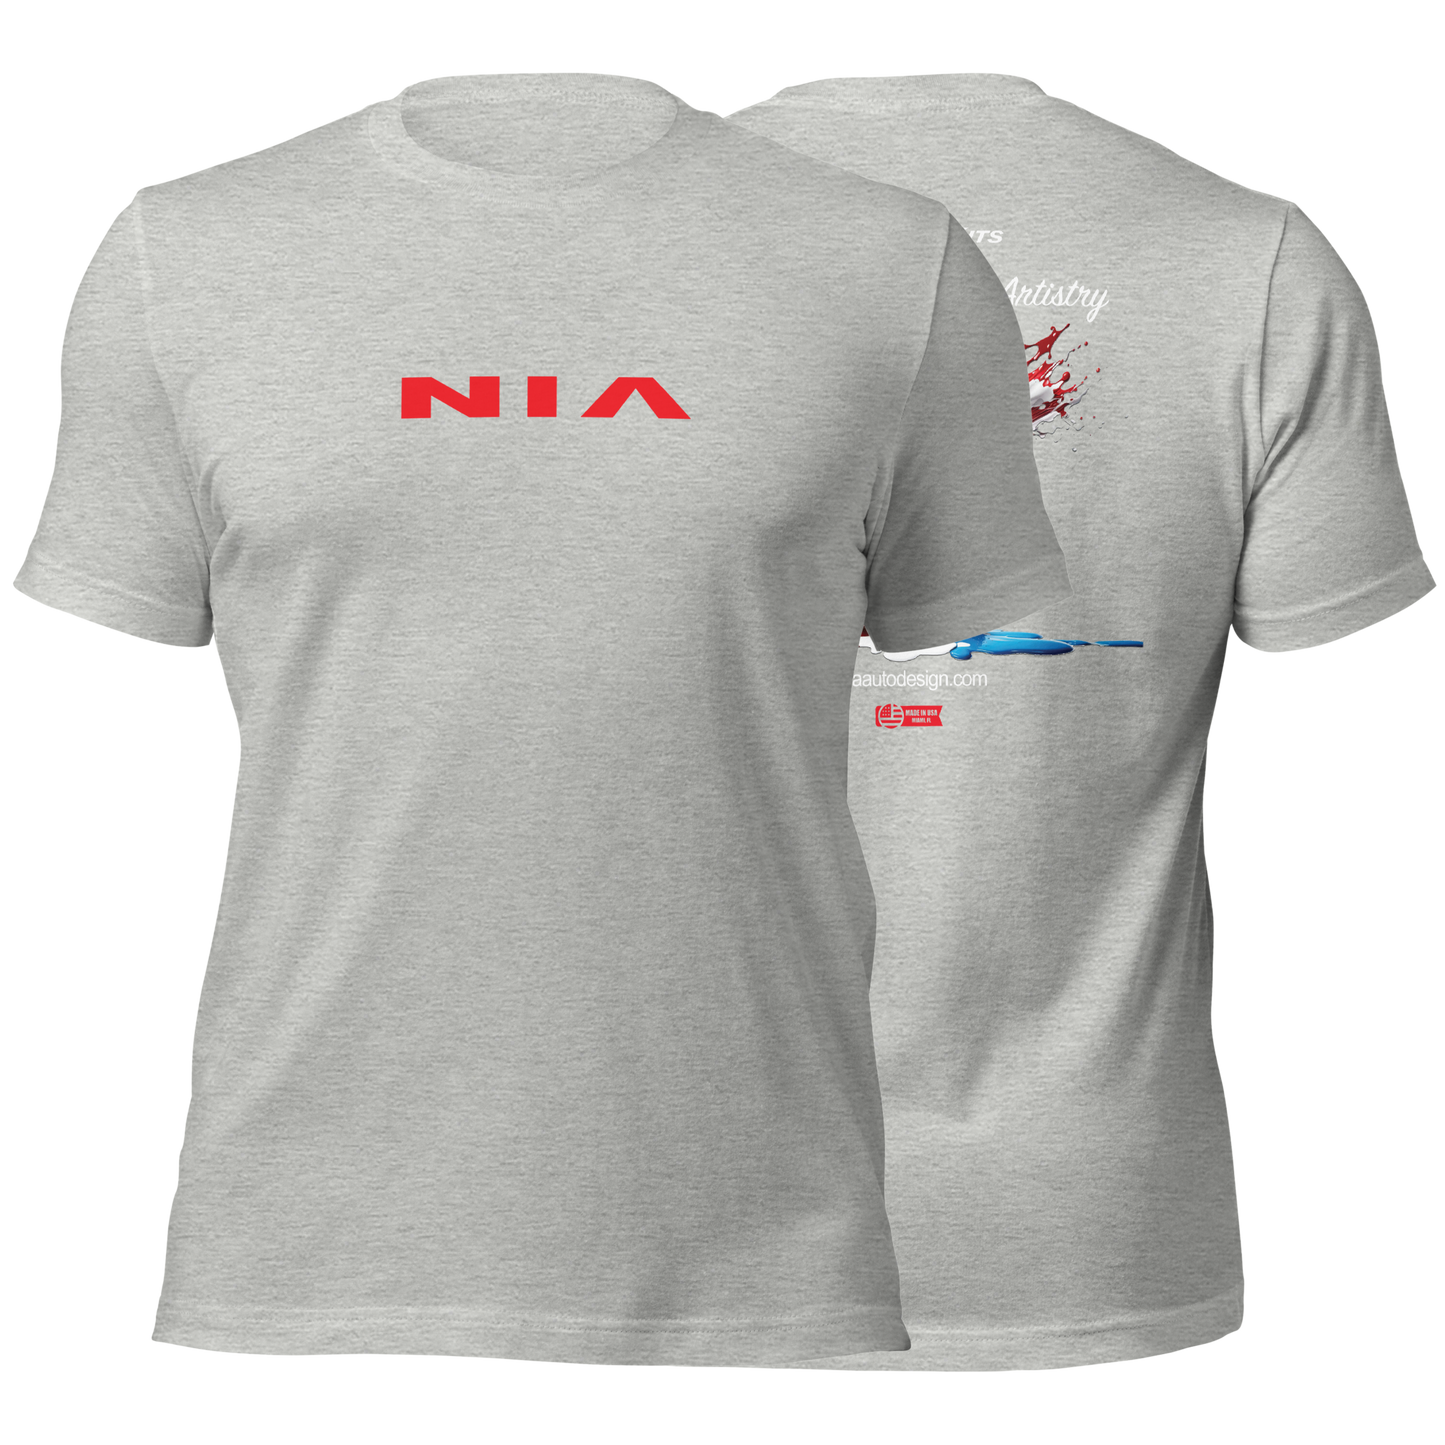 The Splash Colors T-Shirts by NIA Body Kits proudly showing off the importance of not just designing but also manufacturing all our products in the United States. Creating jobs, and keeping high quality control. NIA Body Kits is a proud American brand. Show off your american pride with this stylish shirt perfect for the summer.